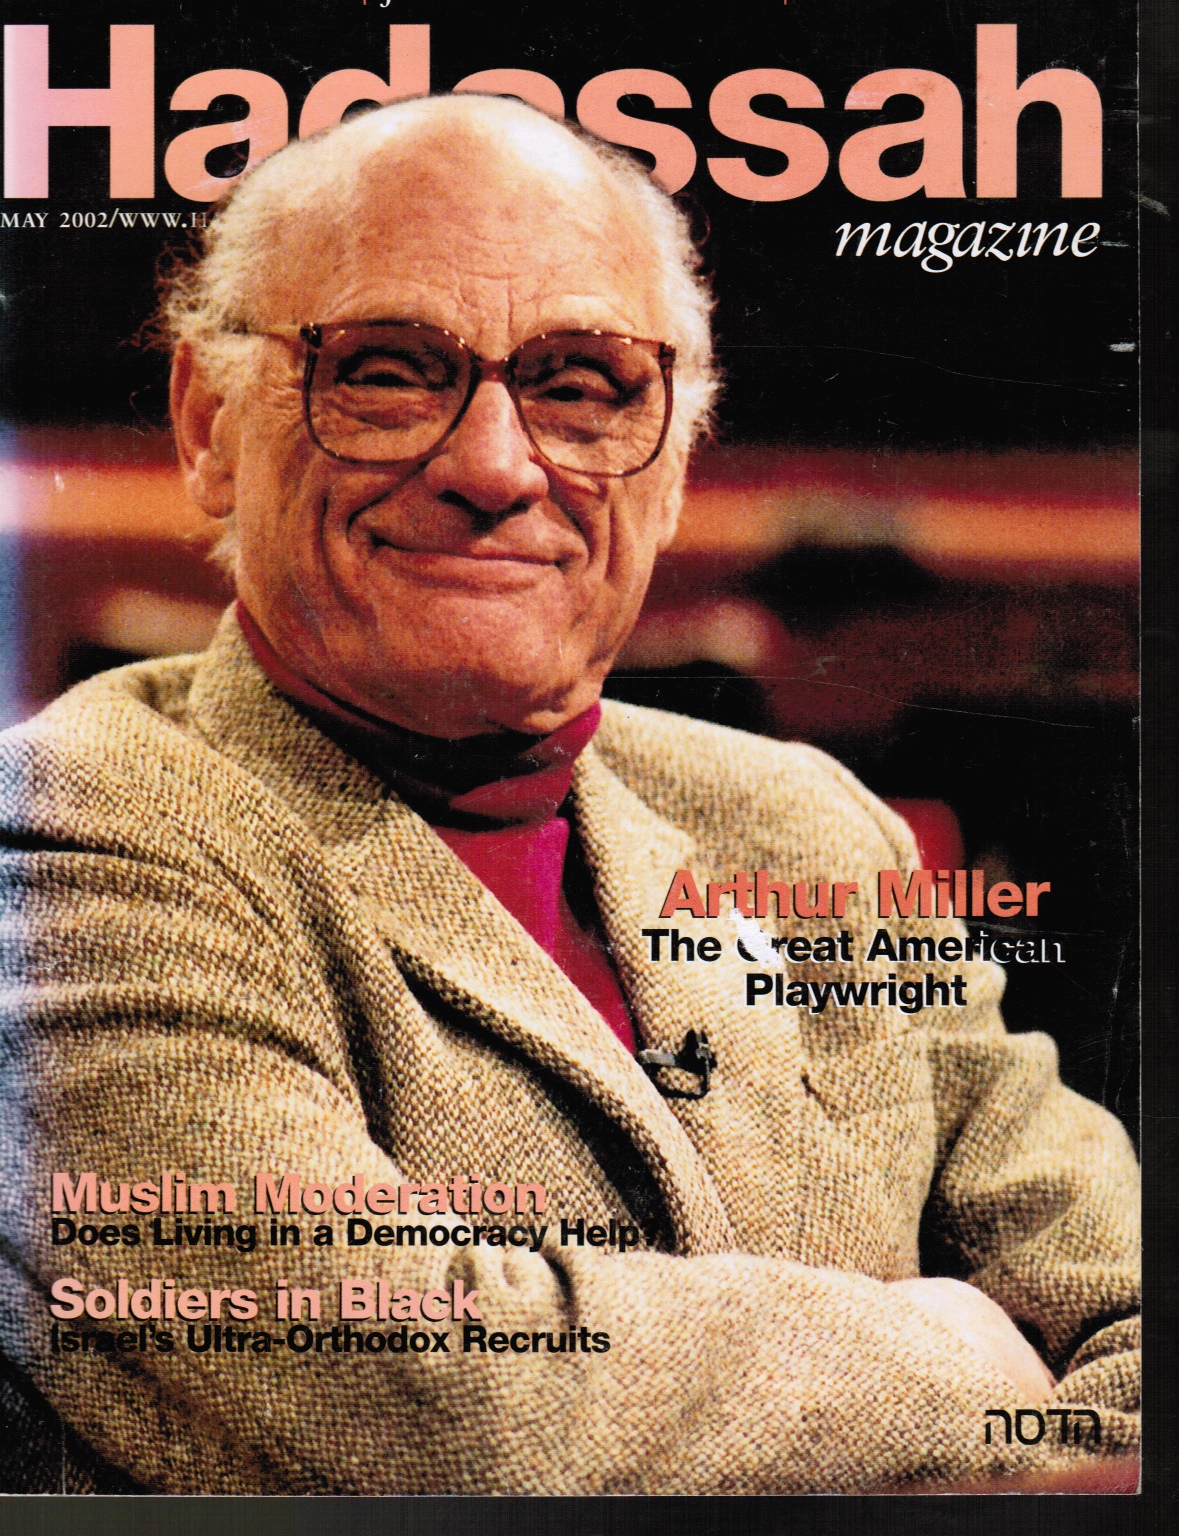 Image for Hadassah Magazine: May 2002 Arthur Miller, The Great American Playwright